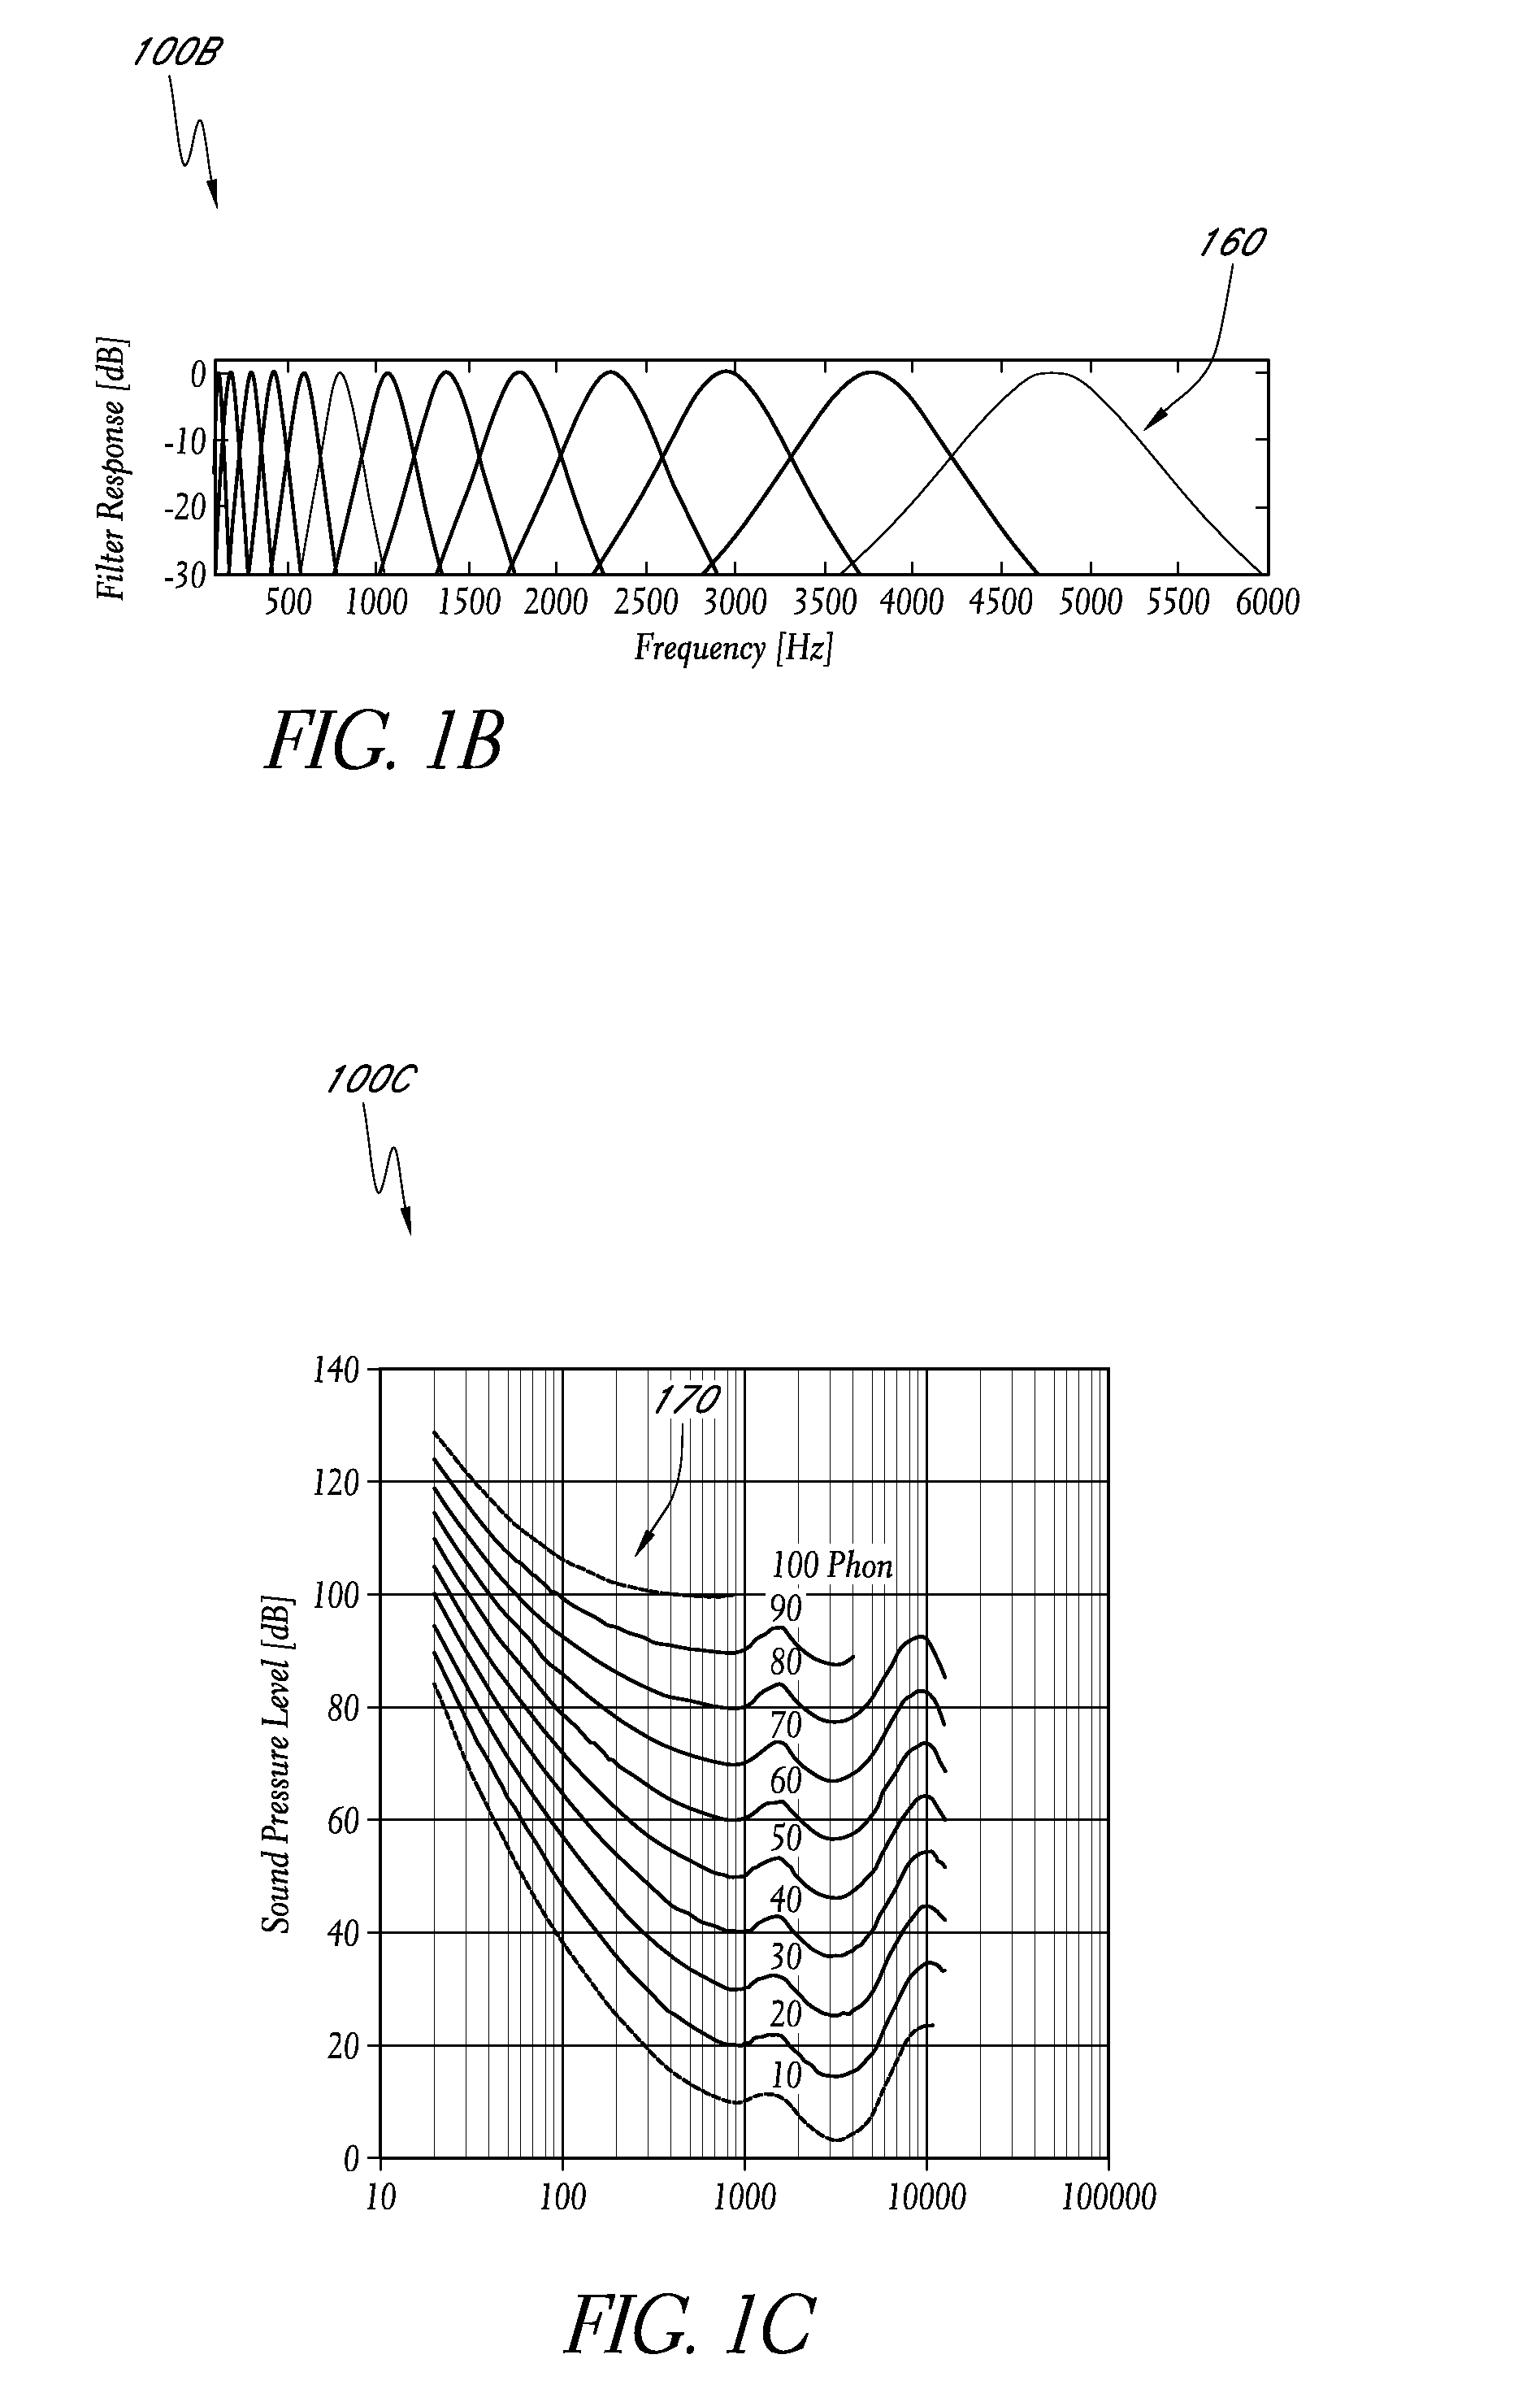 System for adjusting perceived loudness of audio signals